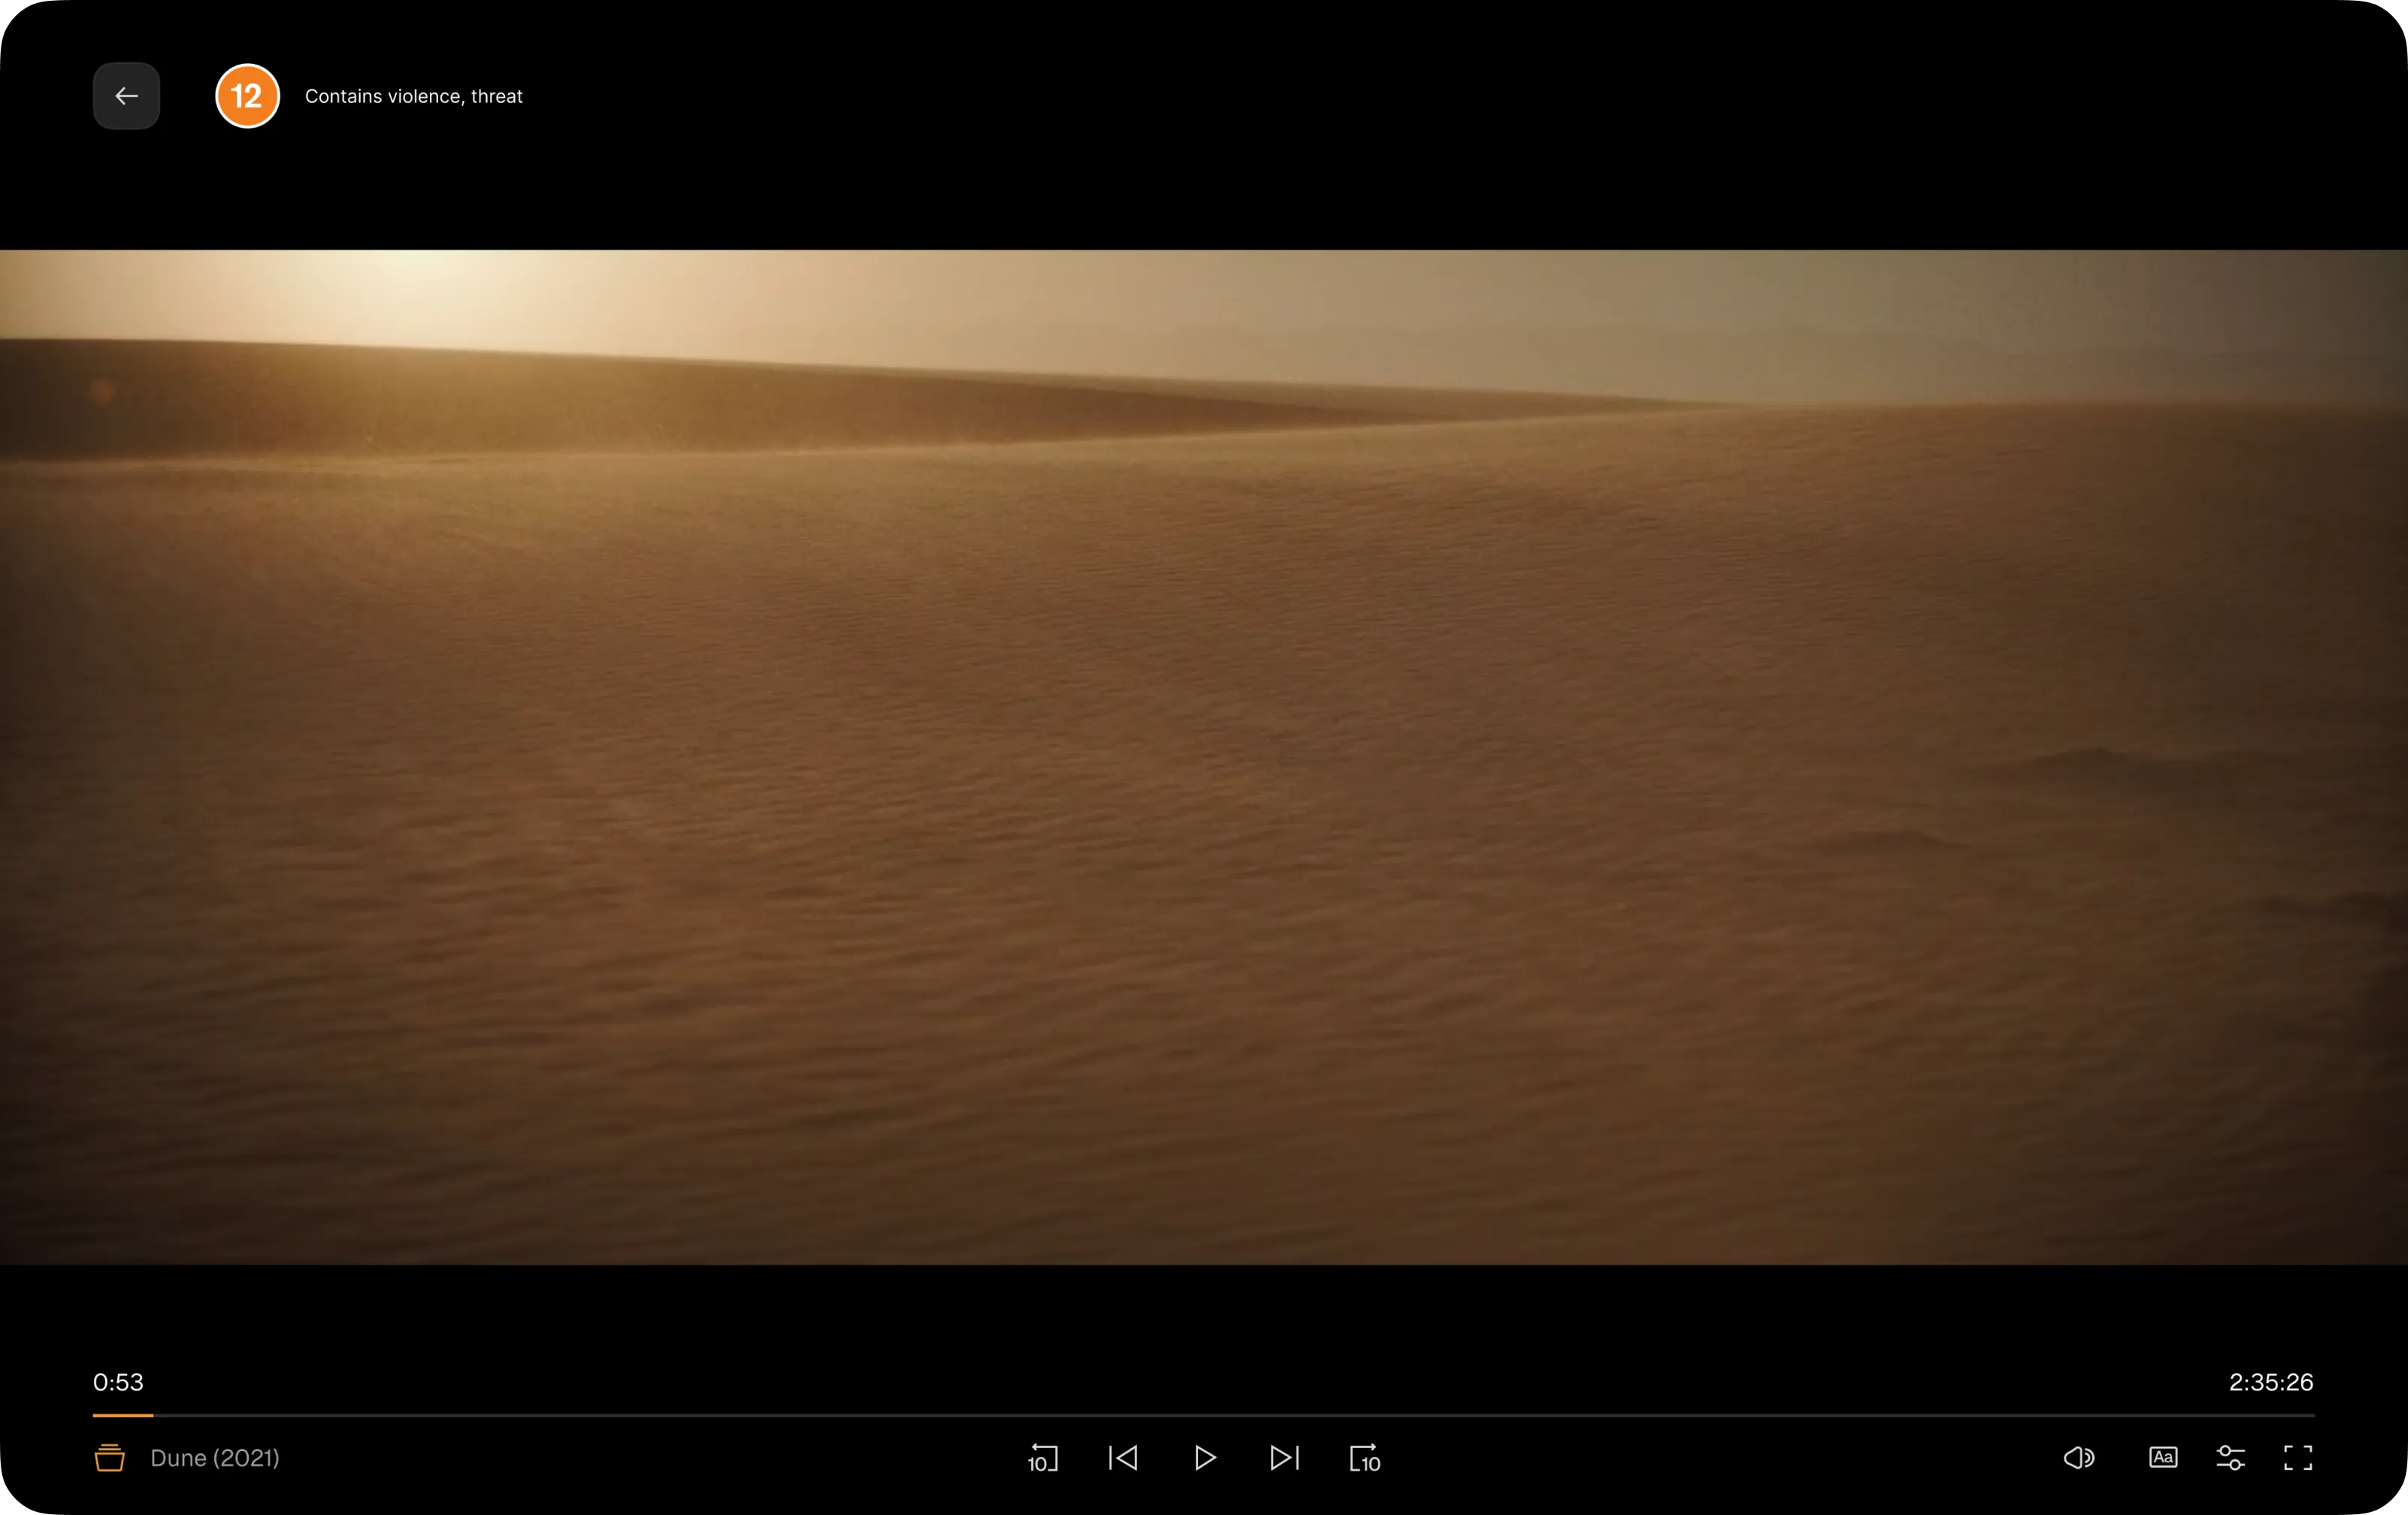 UI of a streaming media player with Dune in the background